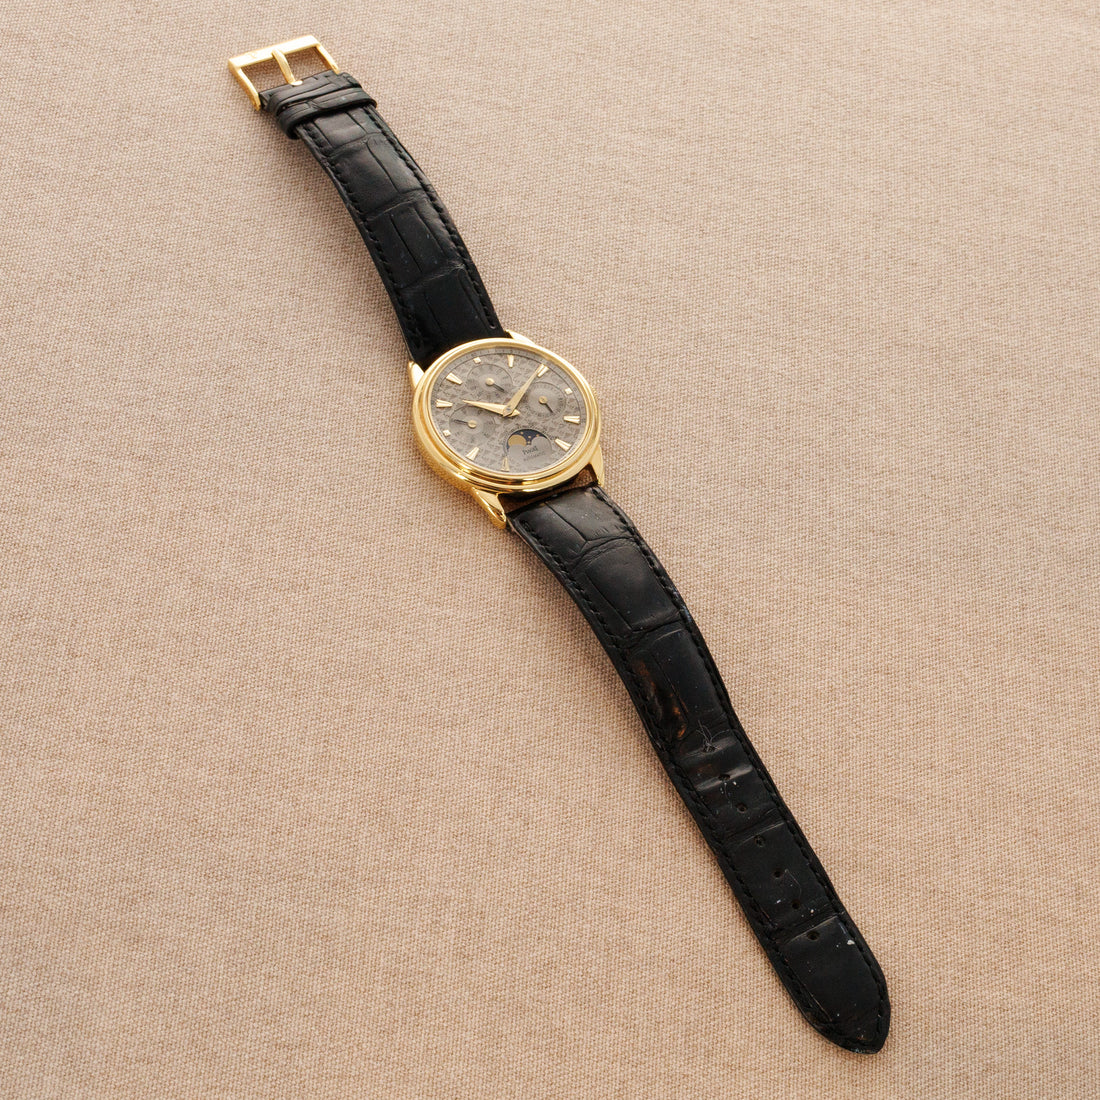 Piaget Yellow Gold Gouverneur Triple Calendar Ref. 15958 with Rare Textured Dial